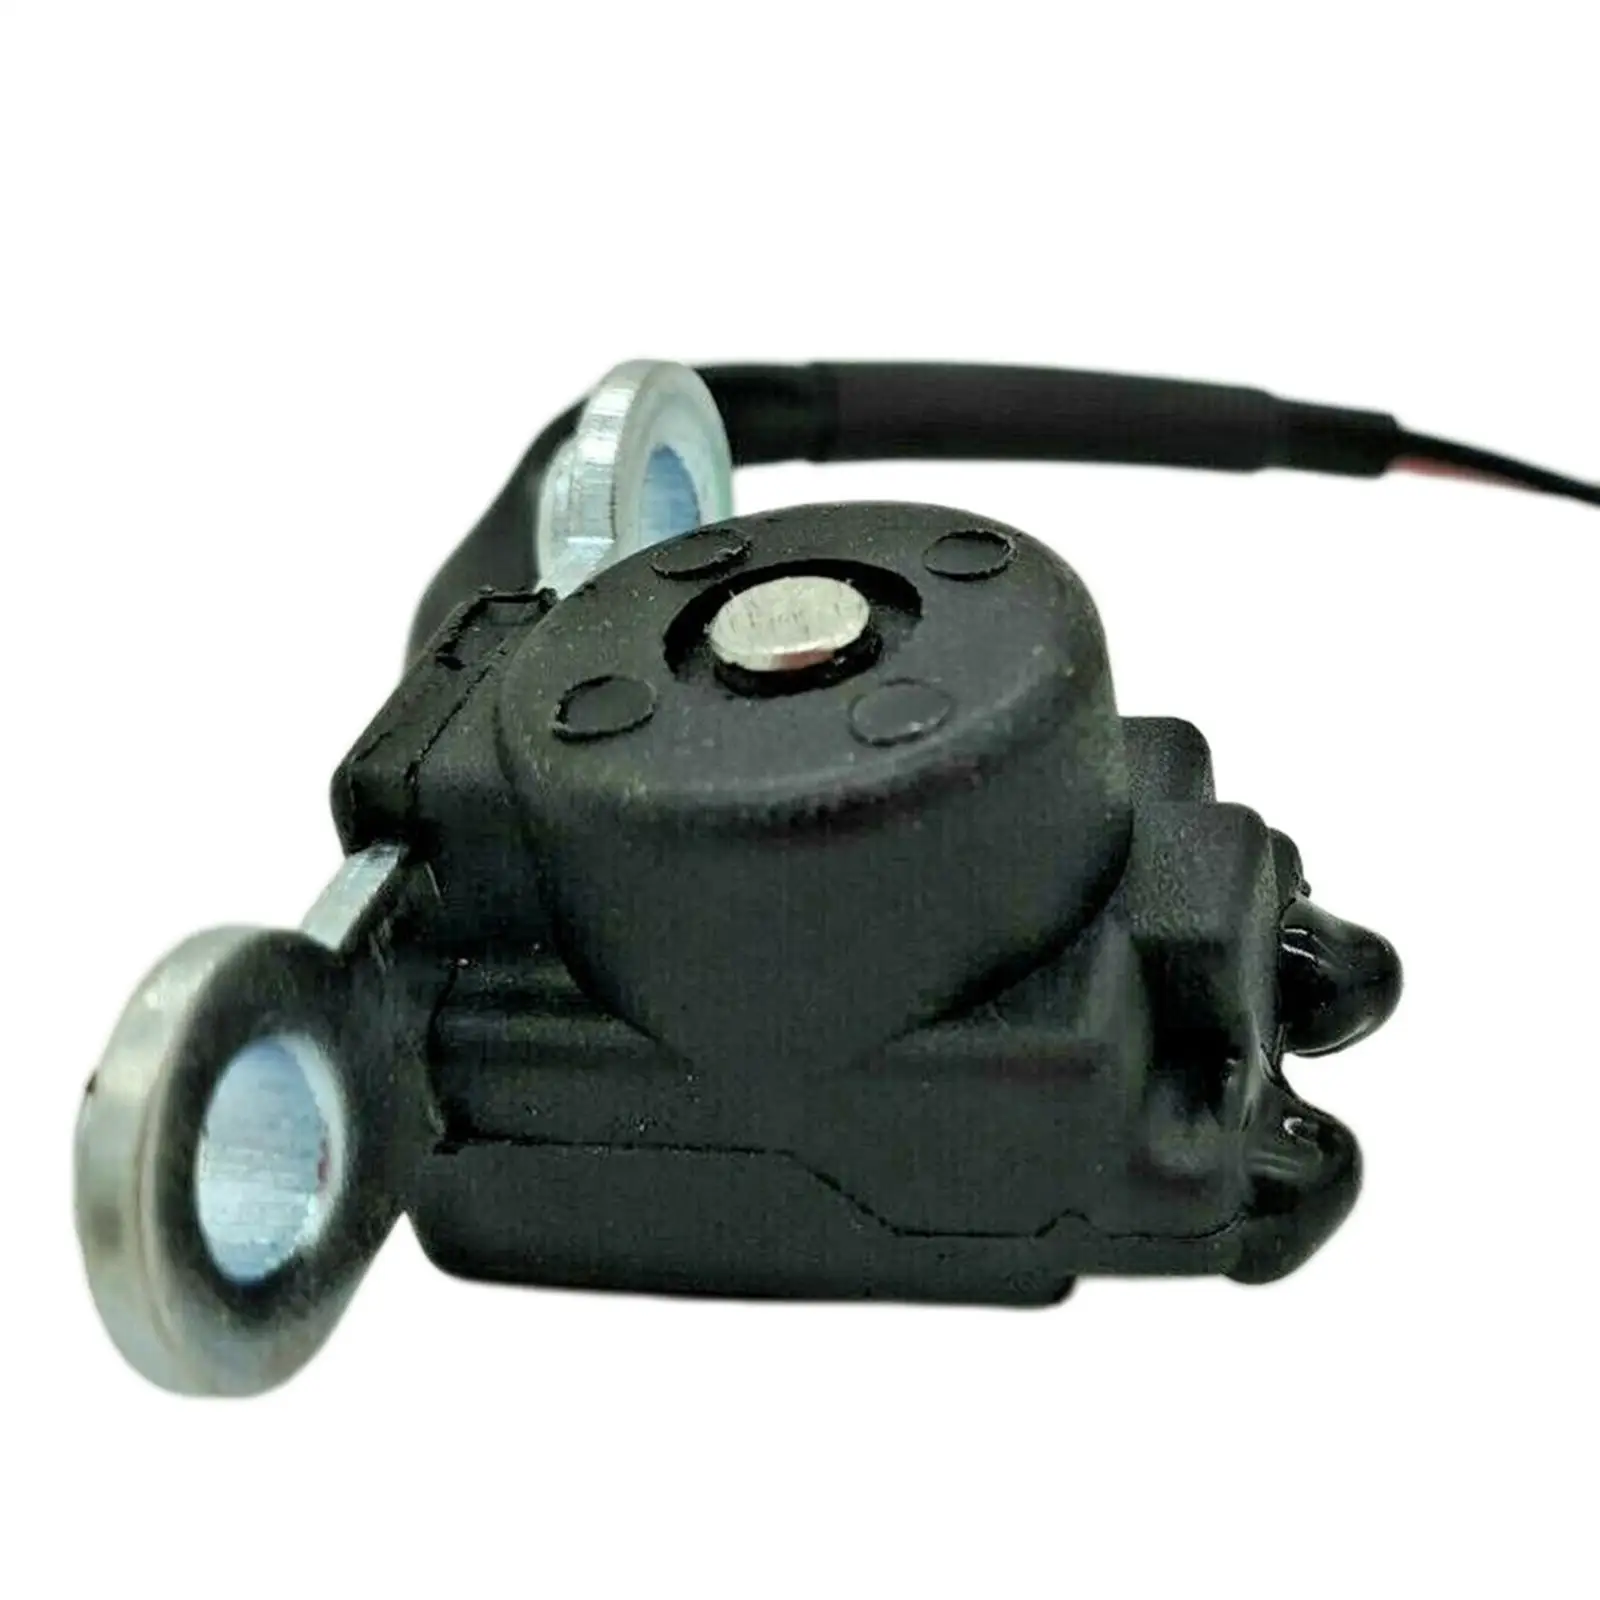 66M-85580-00 835395 Black Boat Parts Replaces Pulser Coil Fit for Yamaha Outboard Engine